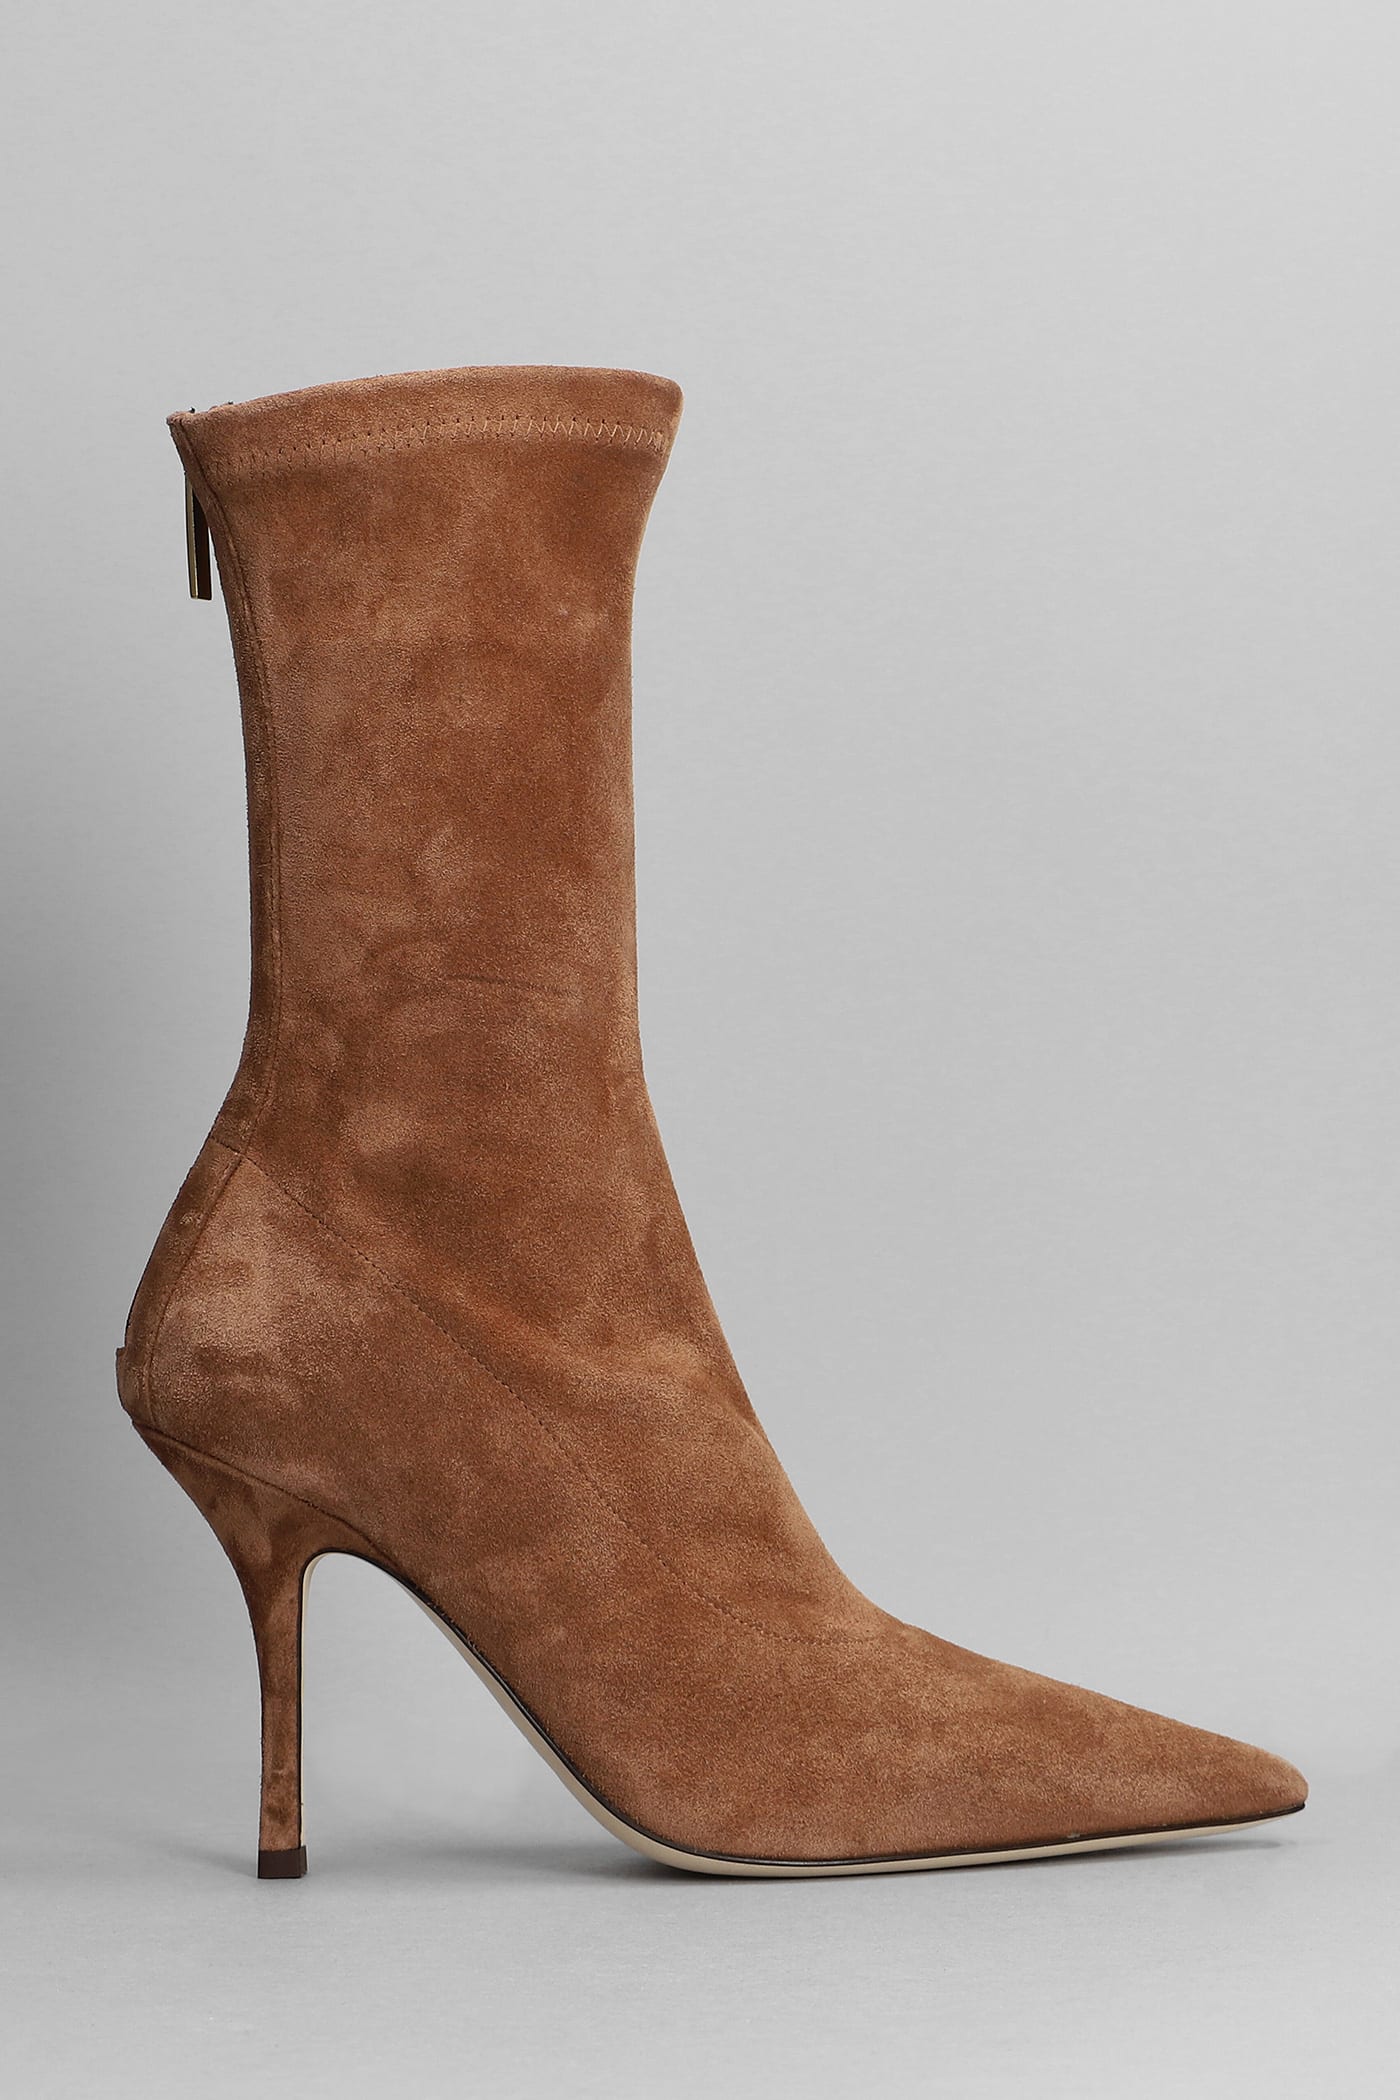 Paris Texas Mama High Heels Ankle Boots In Leather Color Suede